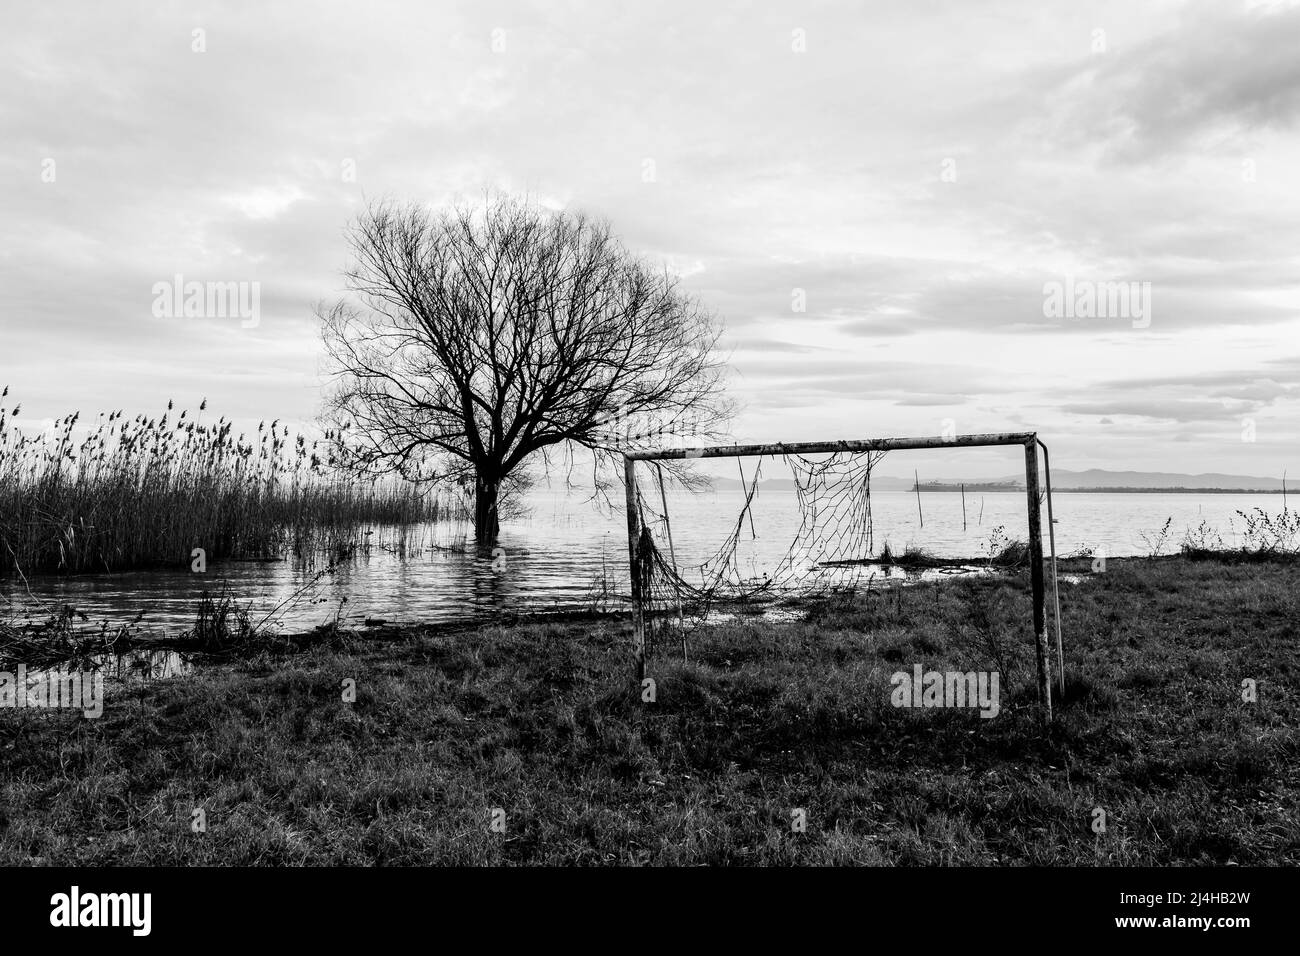 A very old and abandoned soccer goal on the shore of a lake, with a tree on the background and a cloudy sky Stock Photo